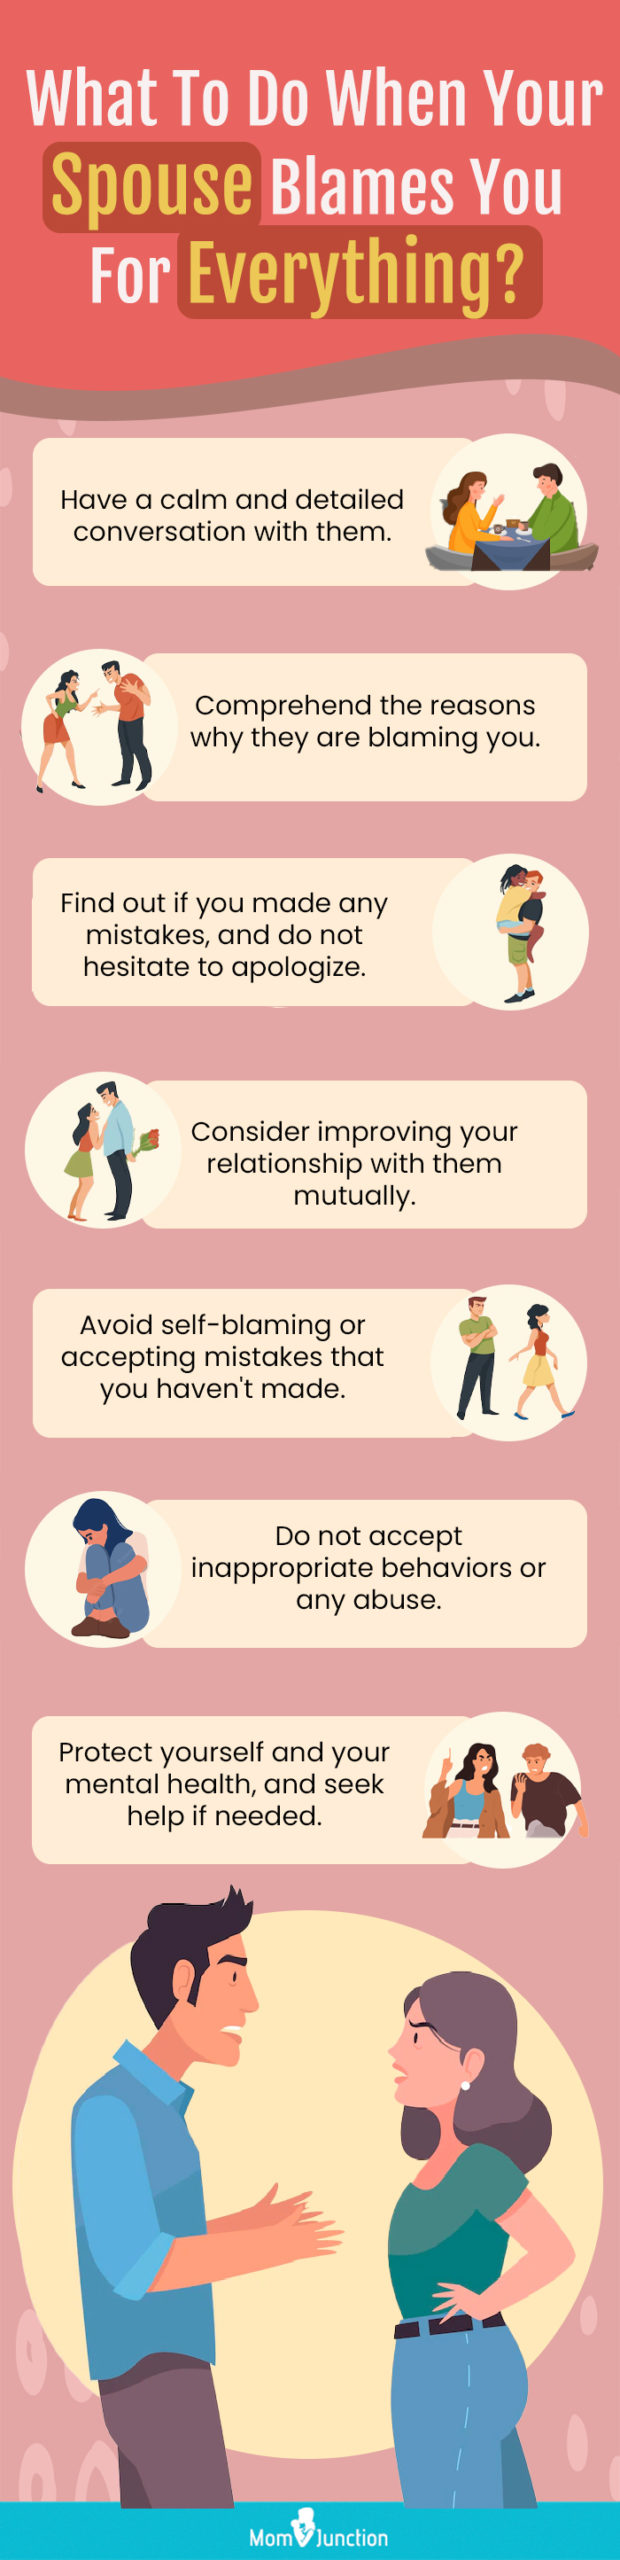 what to do when your spouse blames you for everything (infographic)